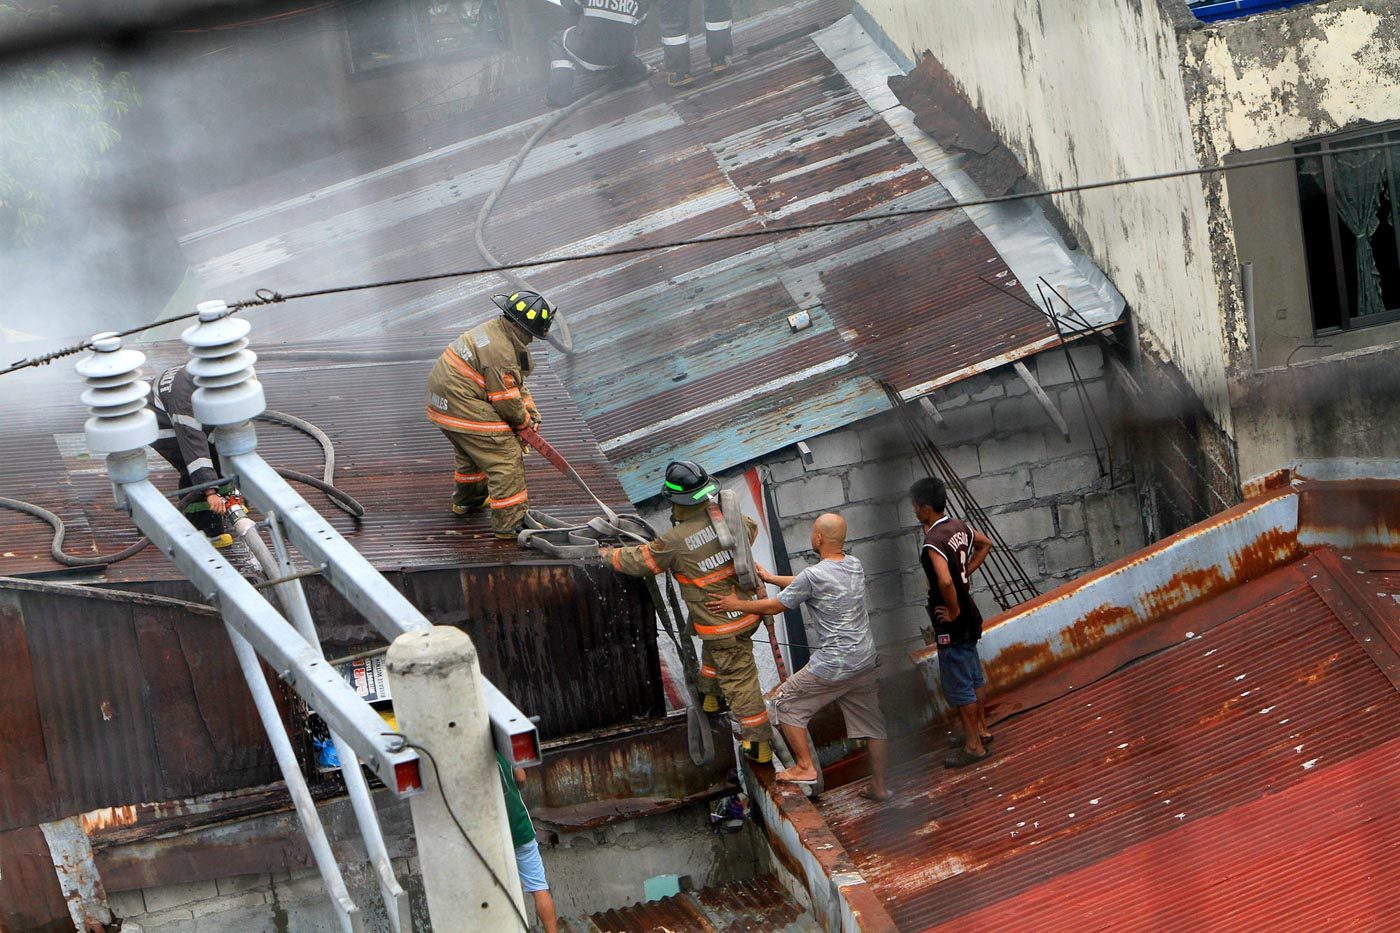 FIRE. Firefighters try to put out a fire that hit a residential area in Anakbayan St, Paco, Manila on June 2, 2018. Photo by Inoue Jaena/Rappler  